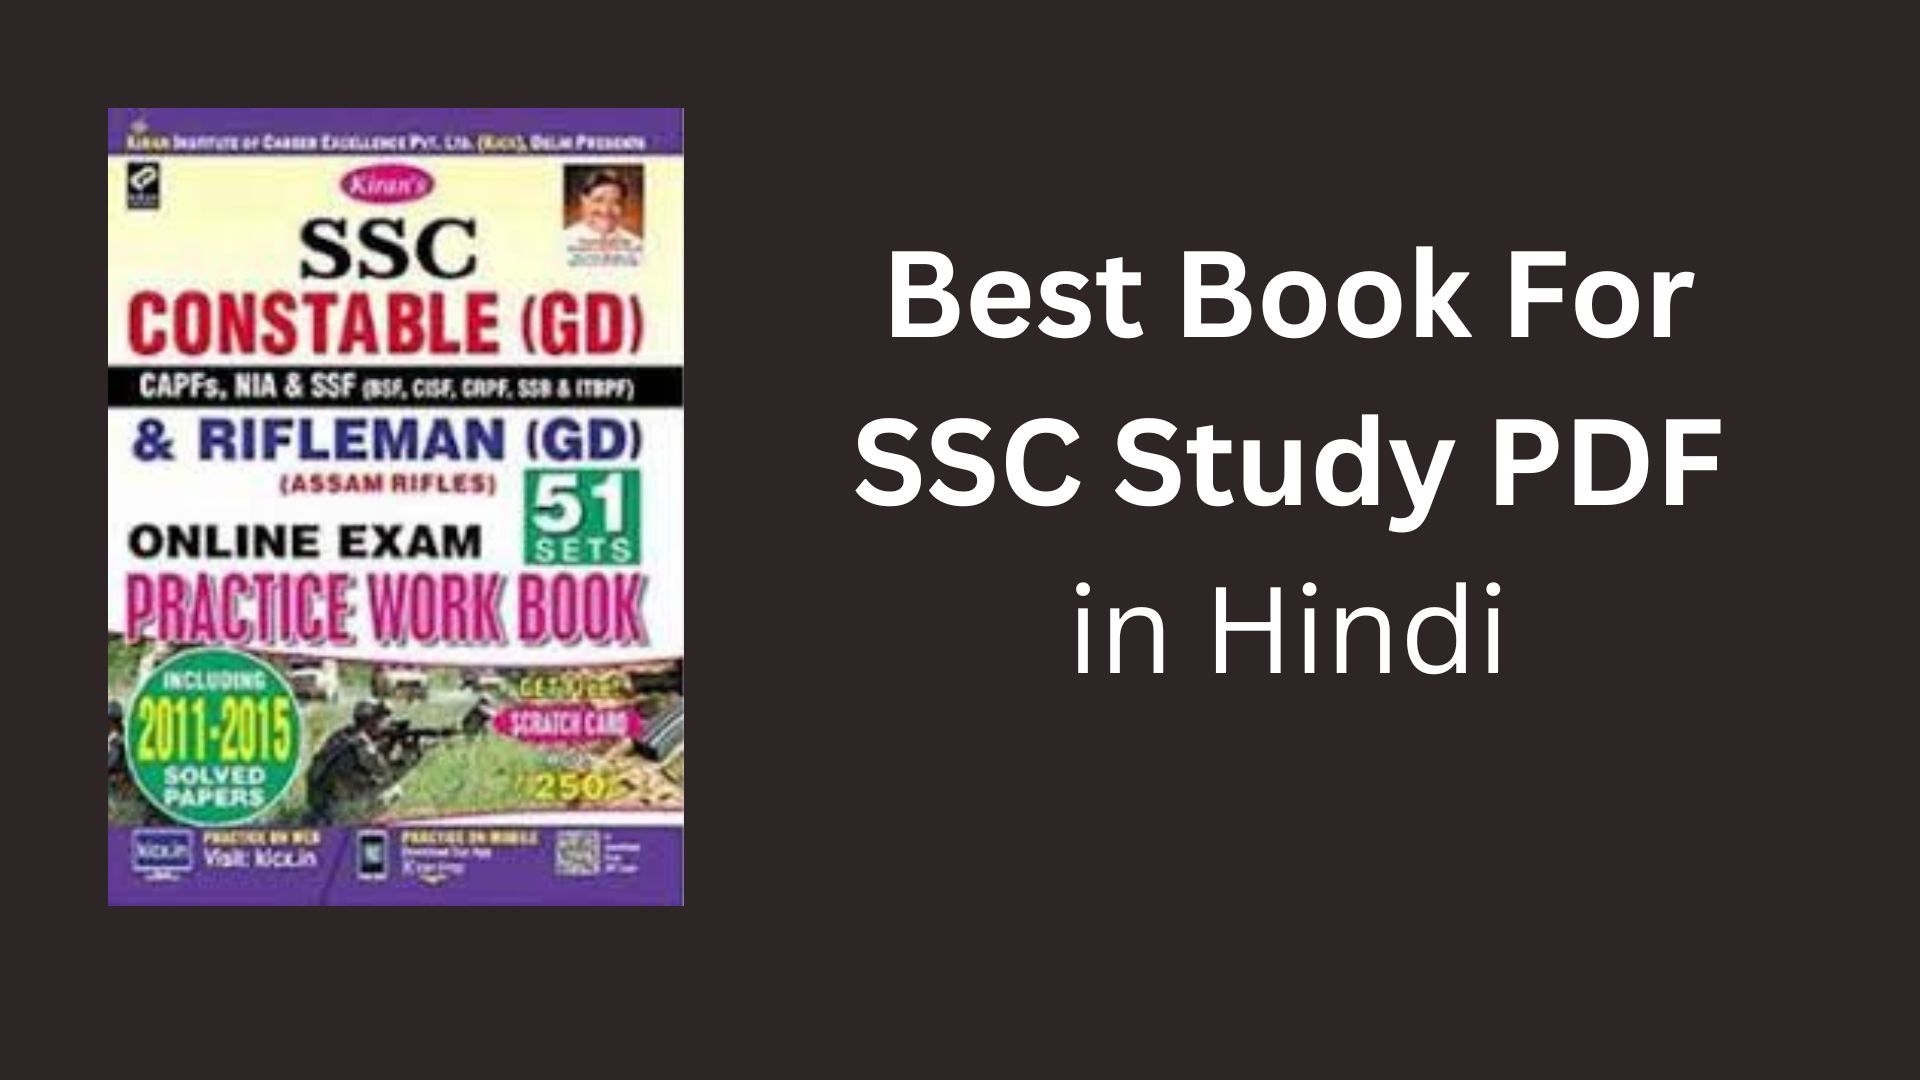 Best Book For SSC Study PDF